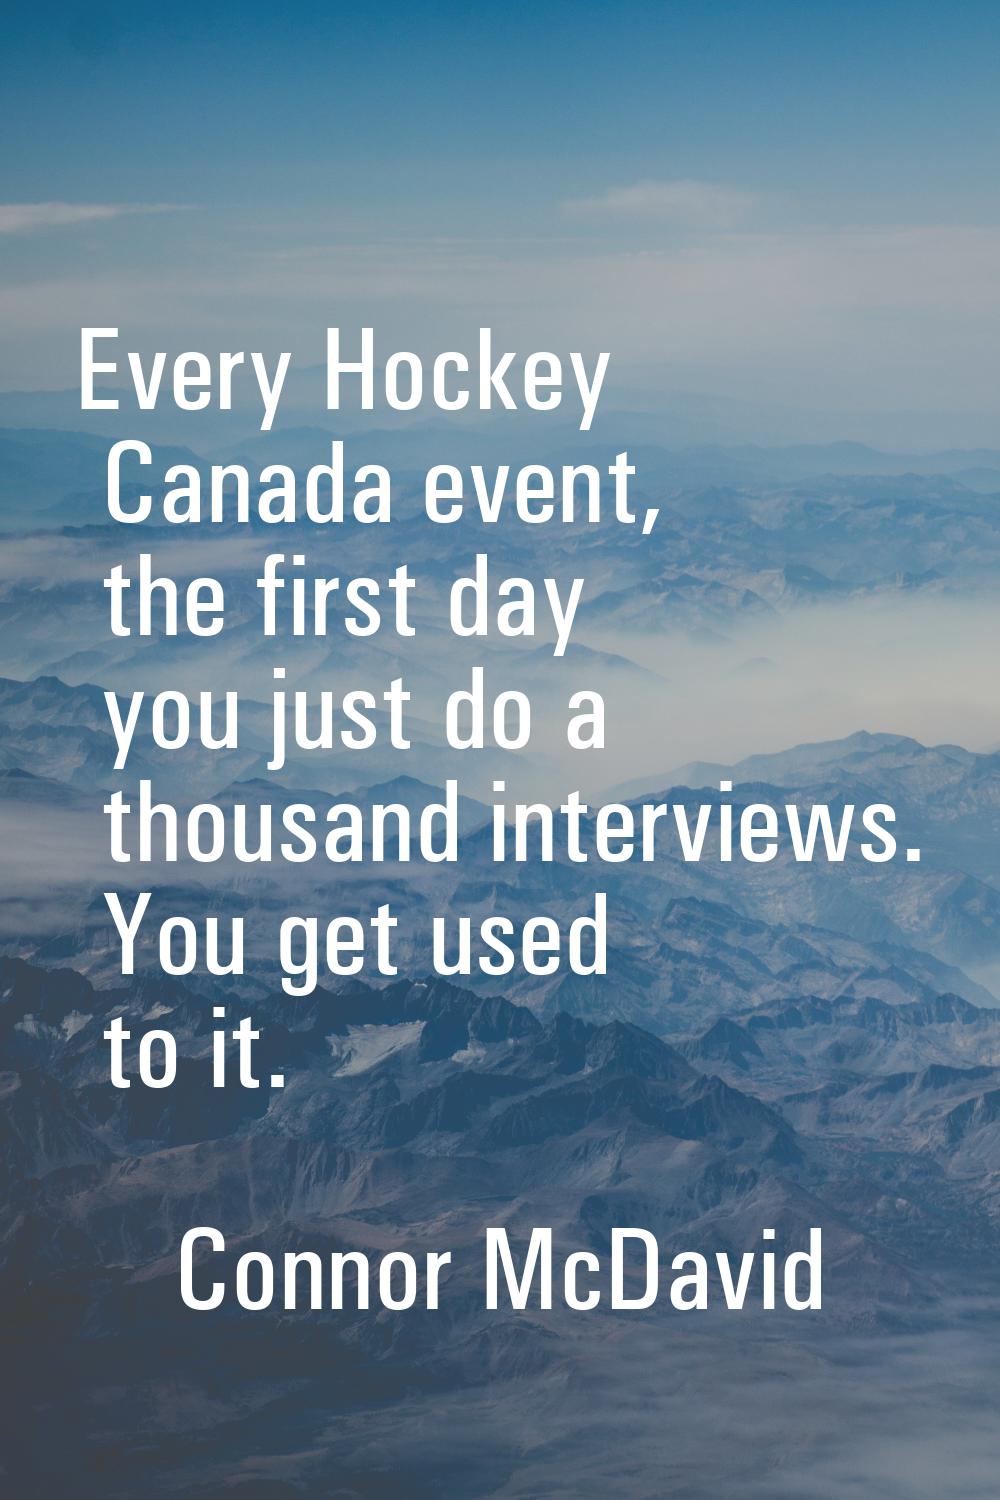 Every Hockey Canada event, the first day you just do a thousand interviews. You get used to it.